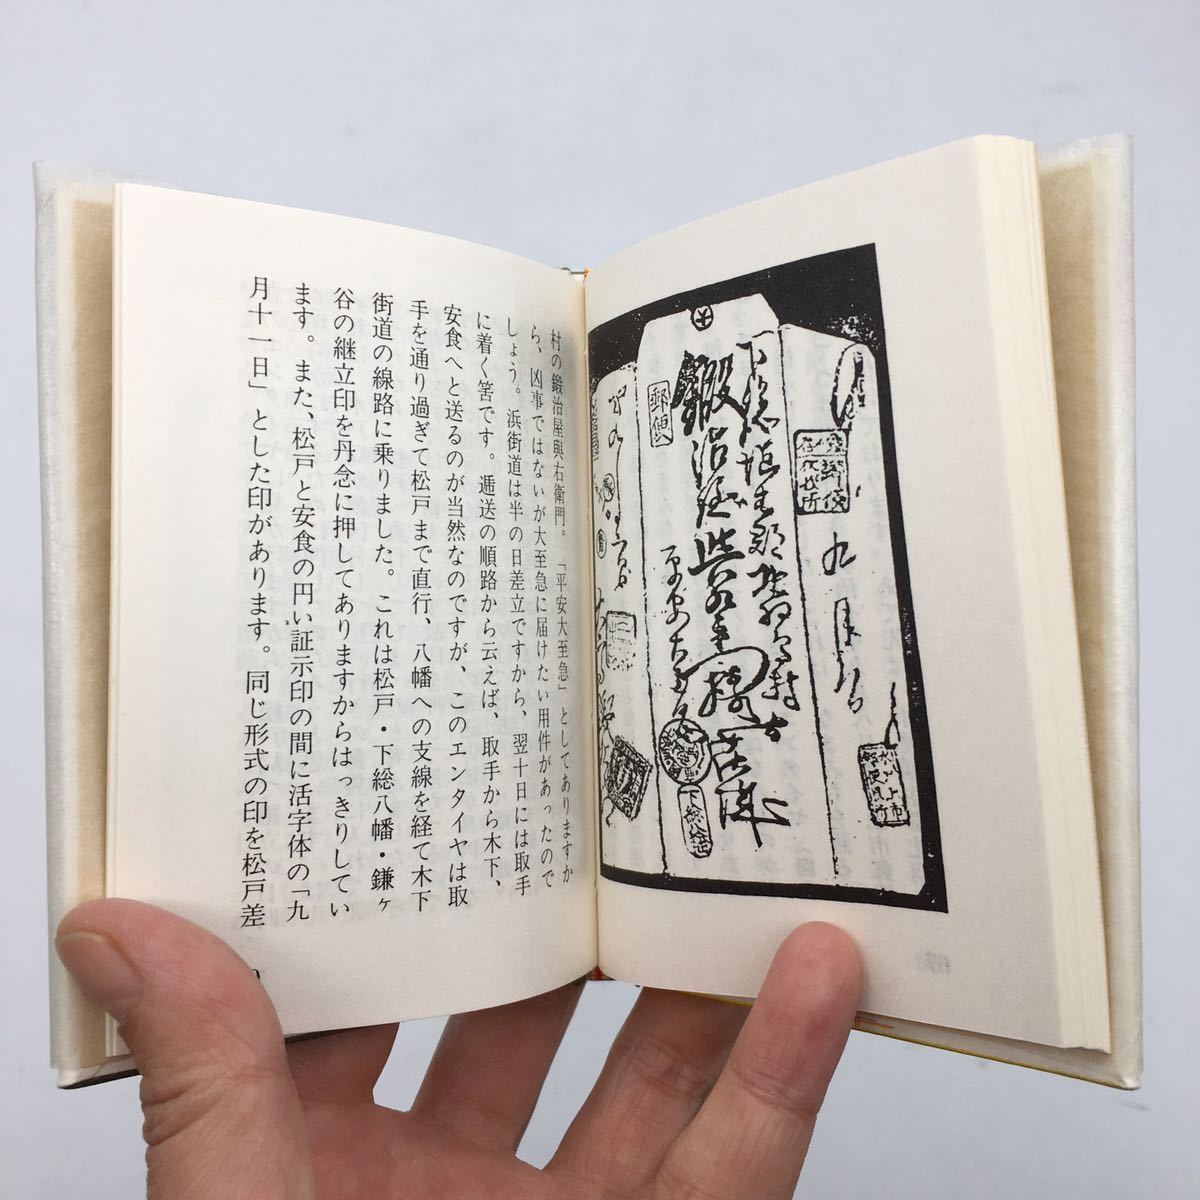 [ Nagoya legume book@77].. road . mail rice field side table . Showa era 57 limitation 300 part sack, paraffin,.. attaching under total . total. mail route .. fresh fish street road mail history 